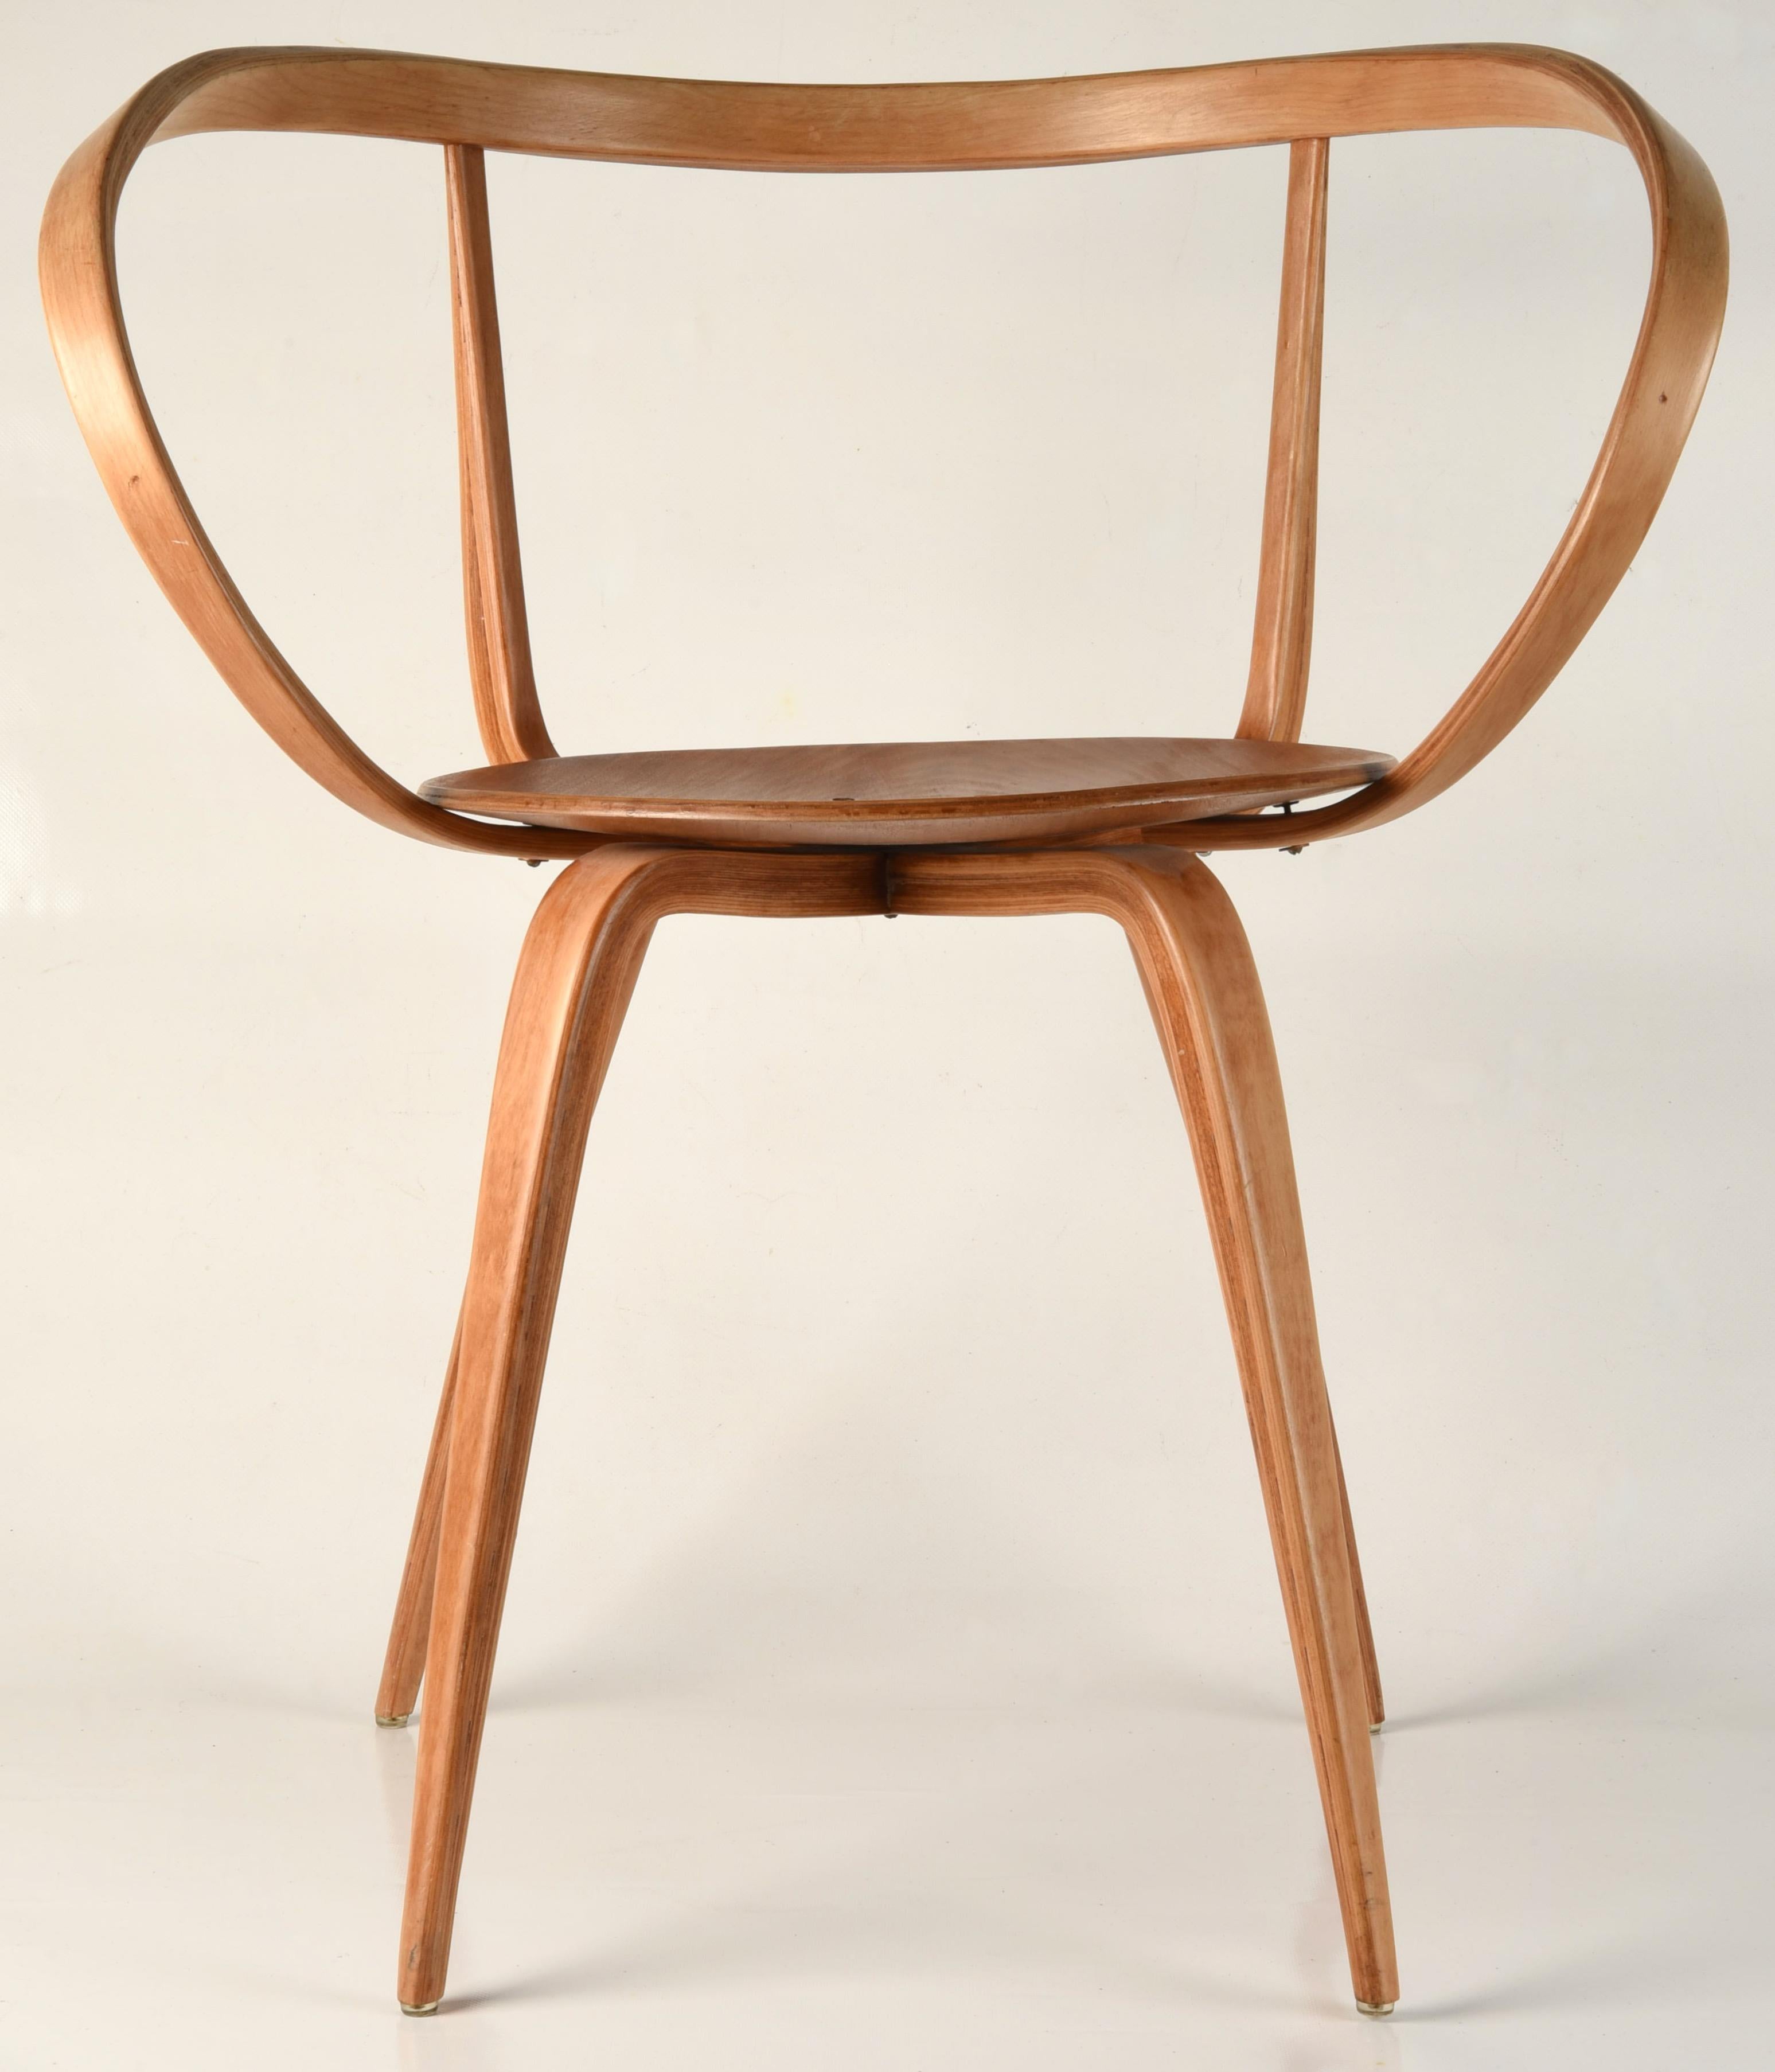 American Original Early George Nelson for Herman Miller Pretzel Chair  For Sale